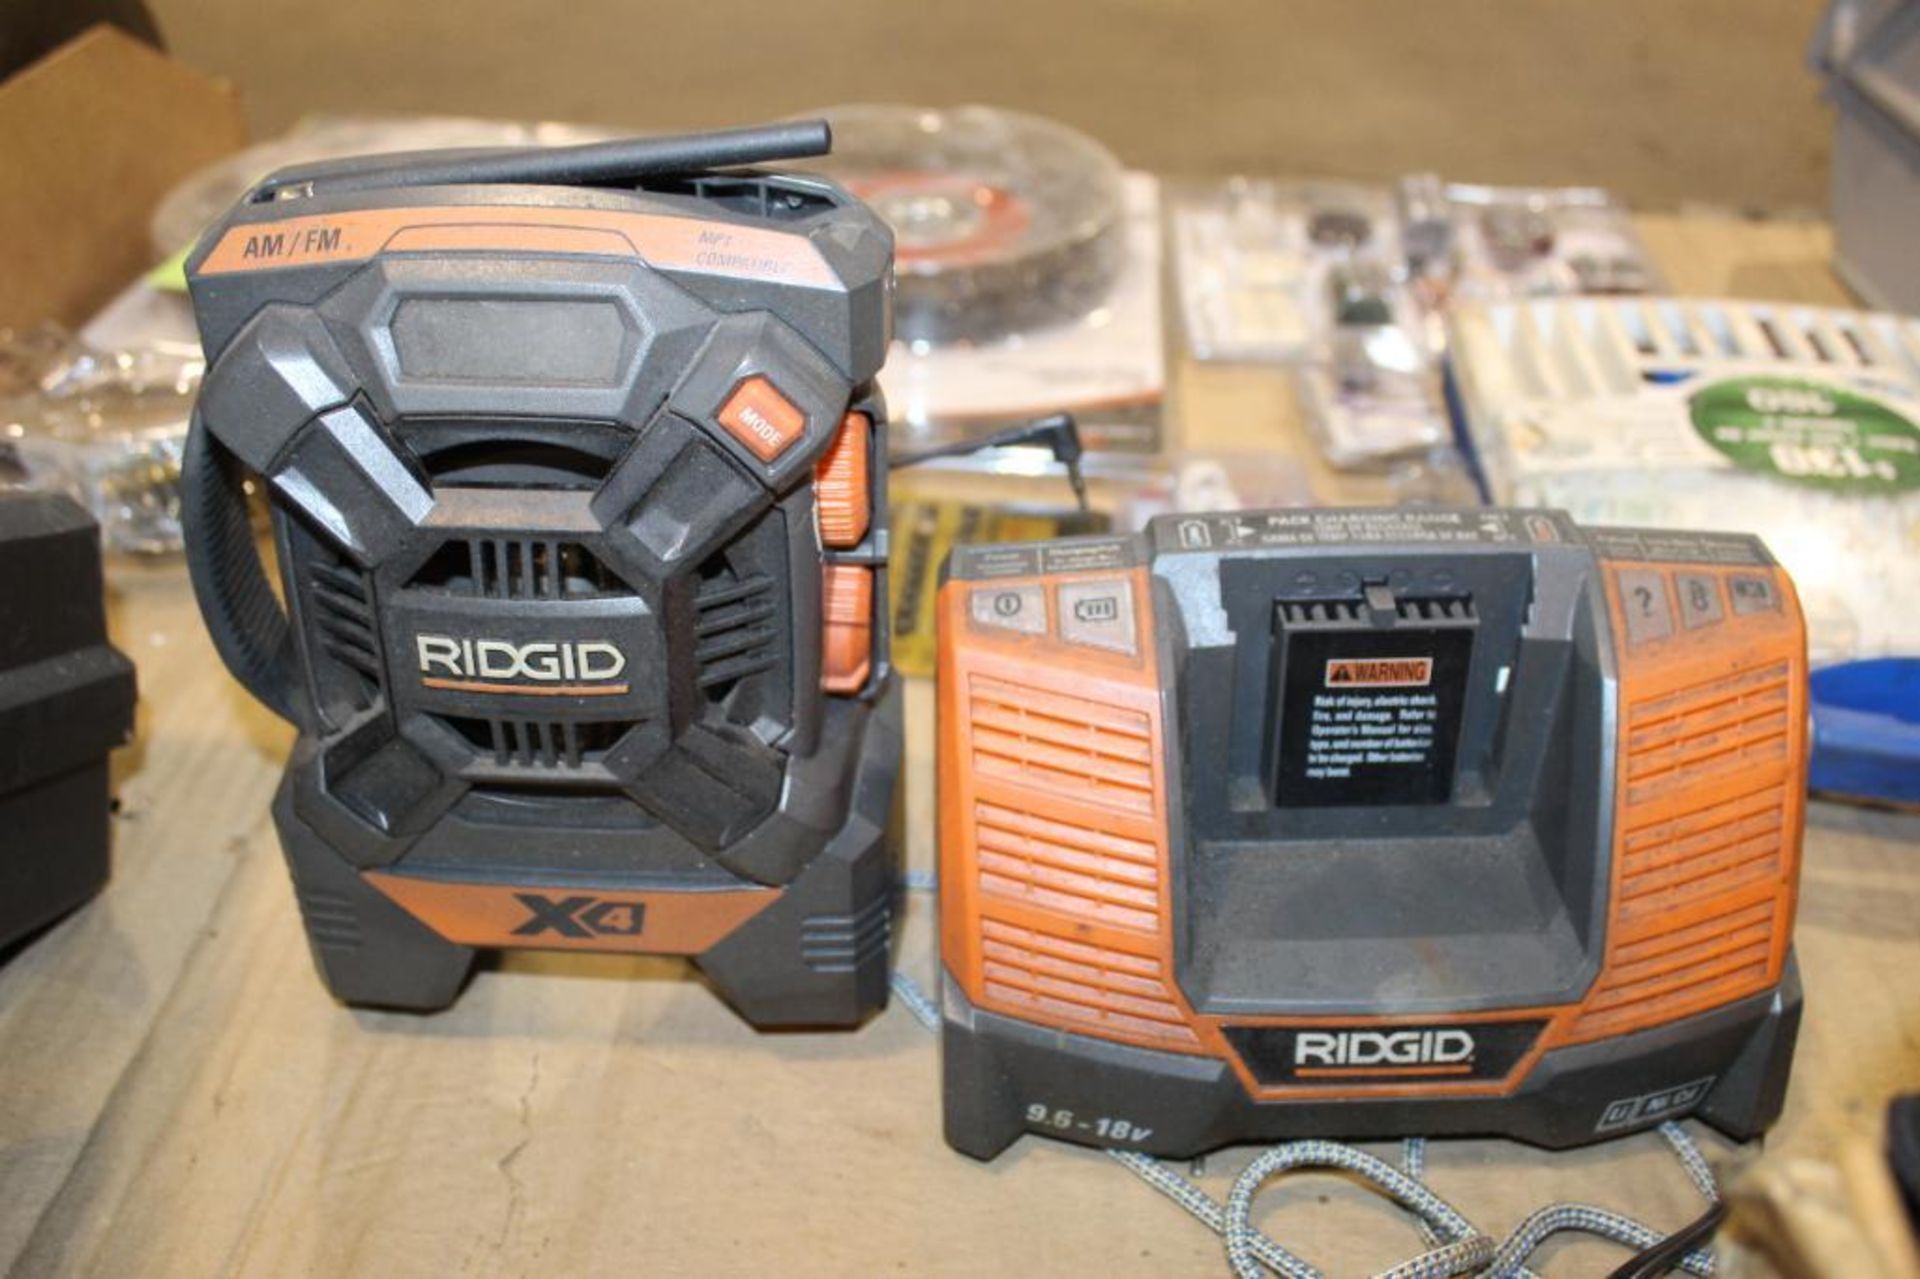 Lot of Ridgid Canvas Bags/Assorted Tool Holders, DeWalt Hardcase with (2) Battery Chargers, Ridgid A - Bild 6 aus 13